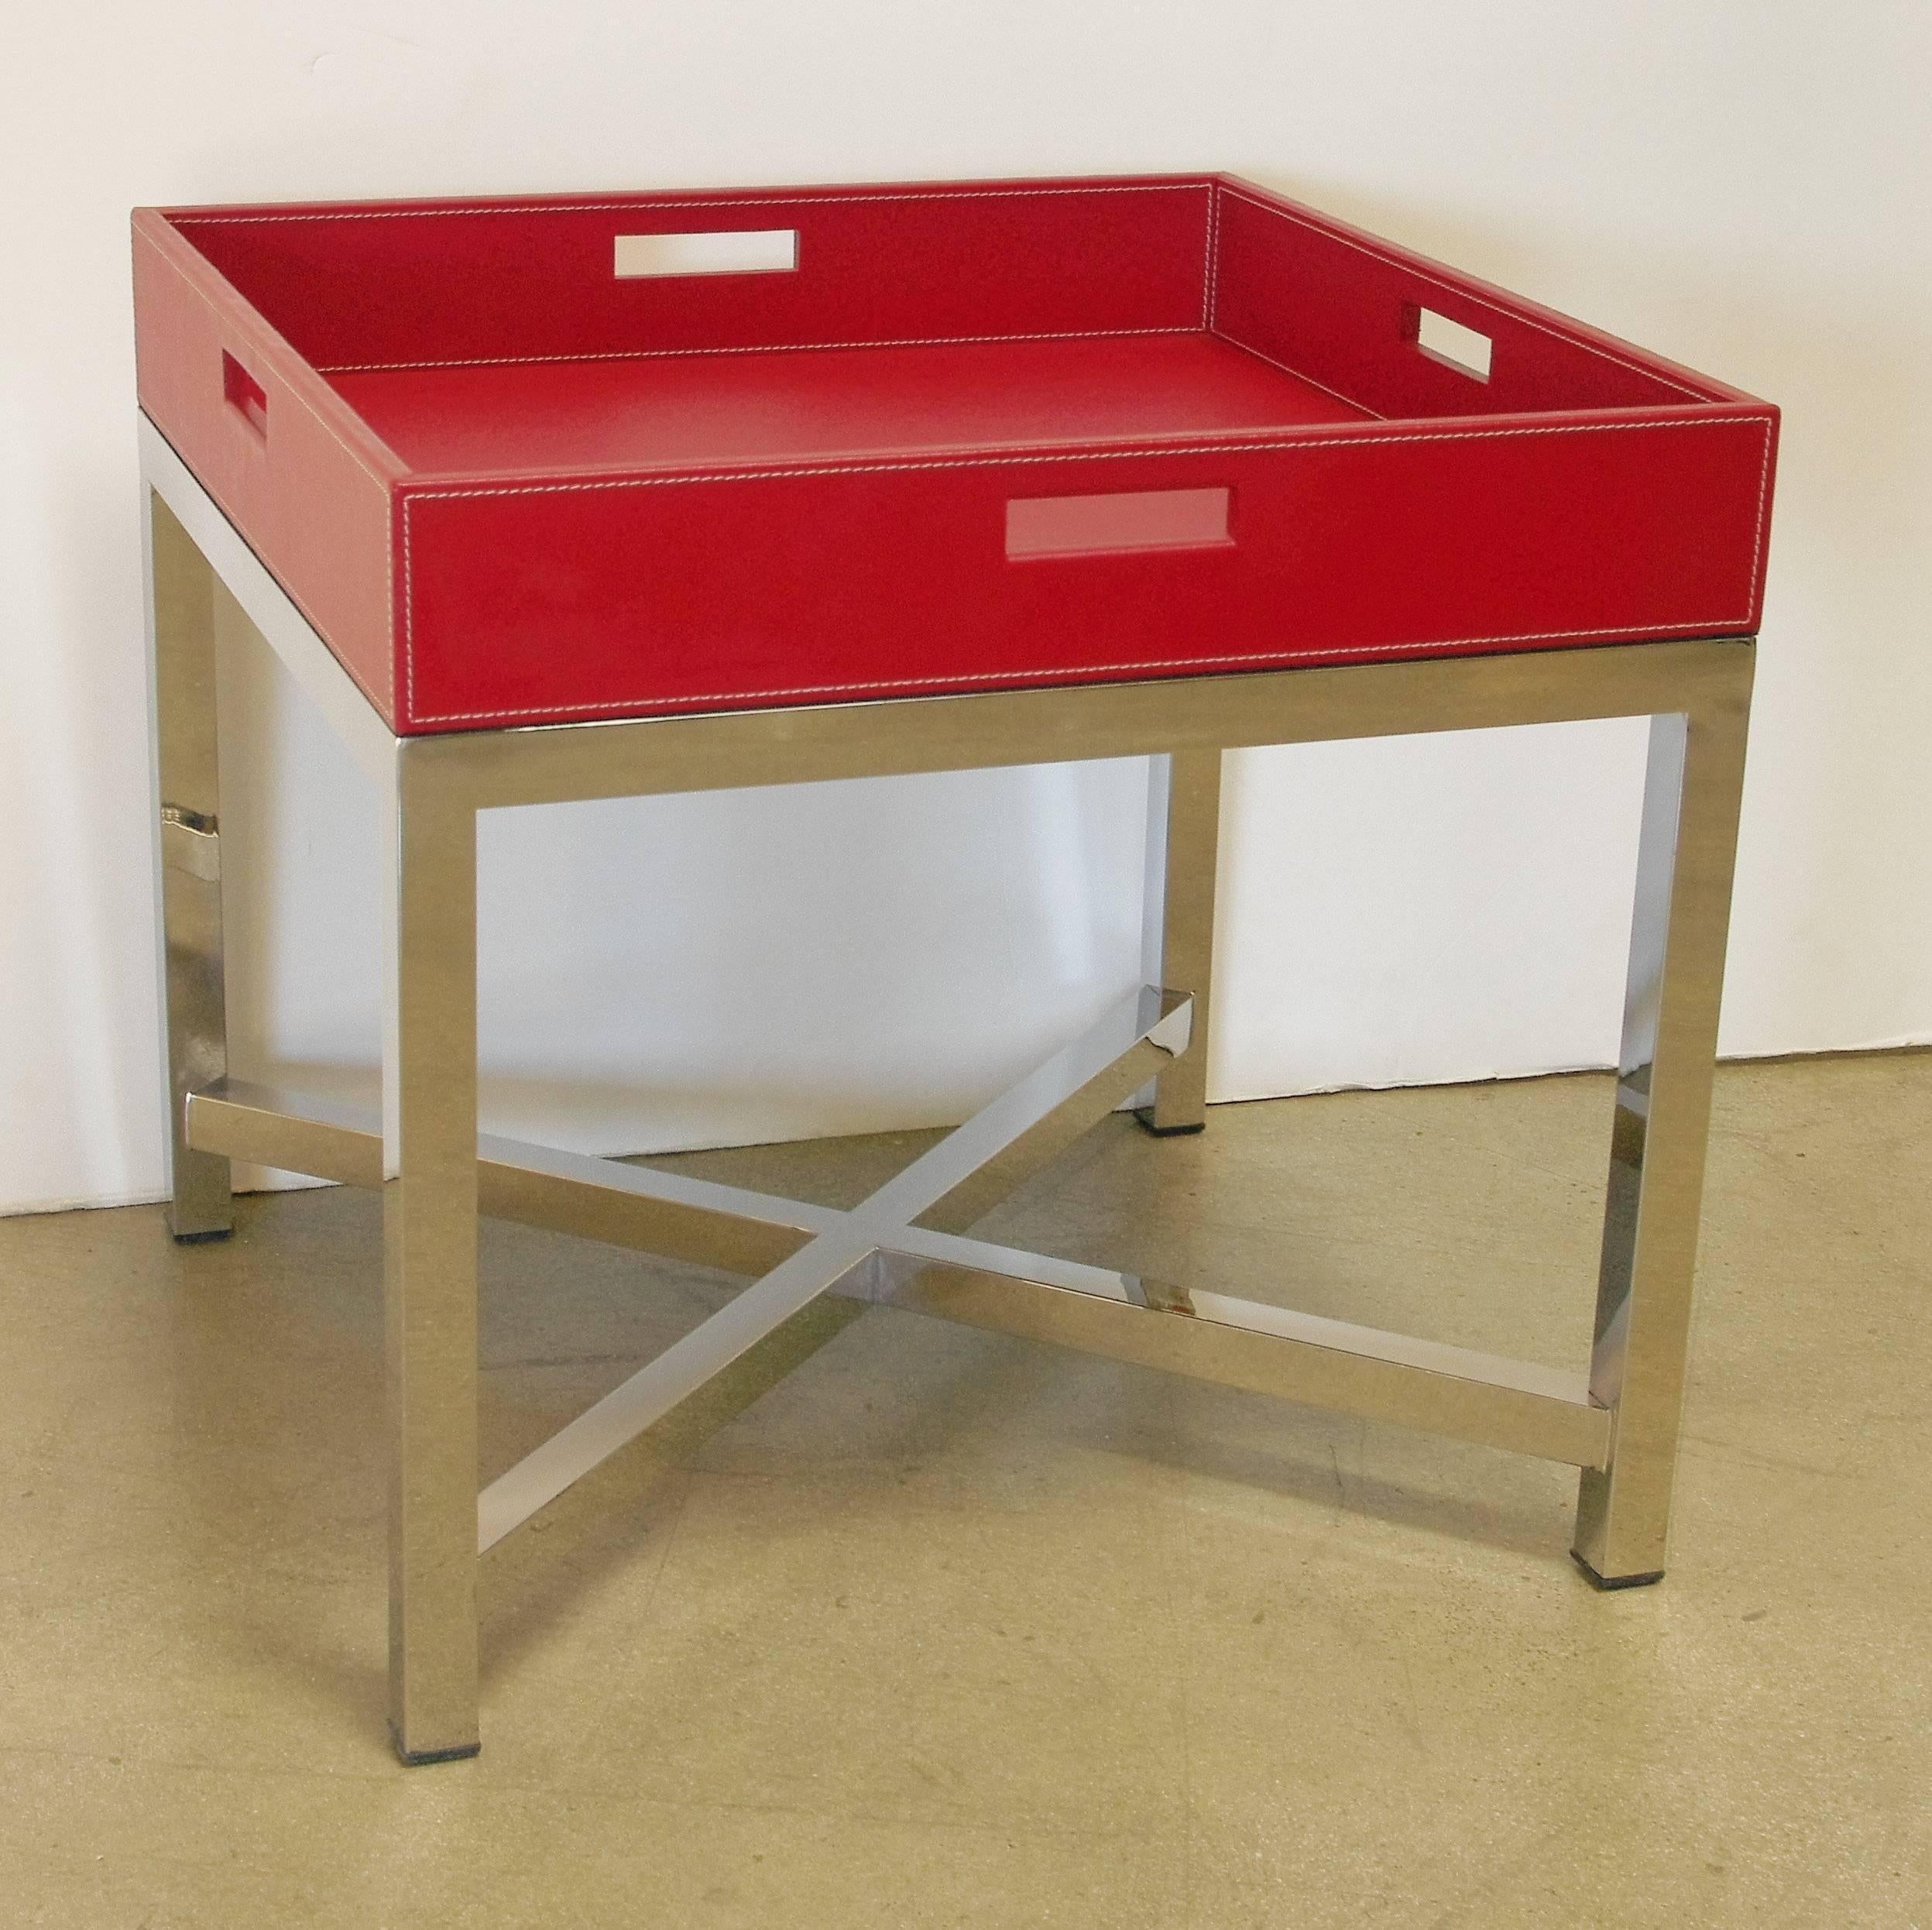 Red leather and stainless steel tray table / Made in Italy, 1980s.